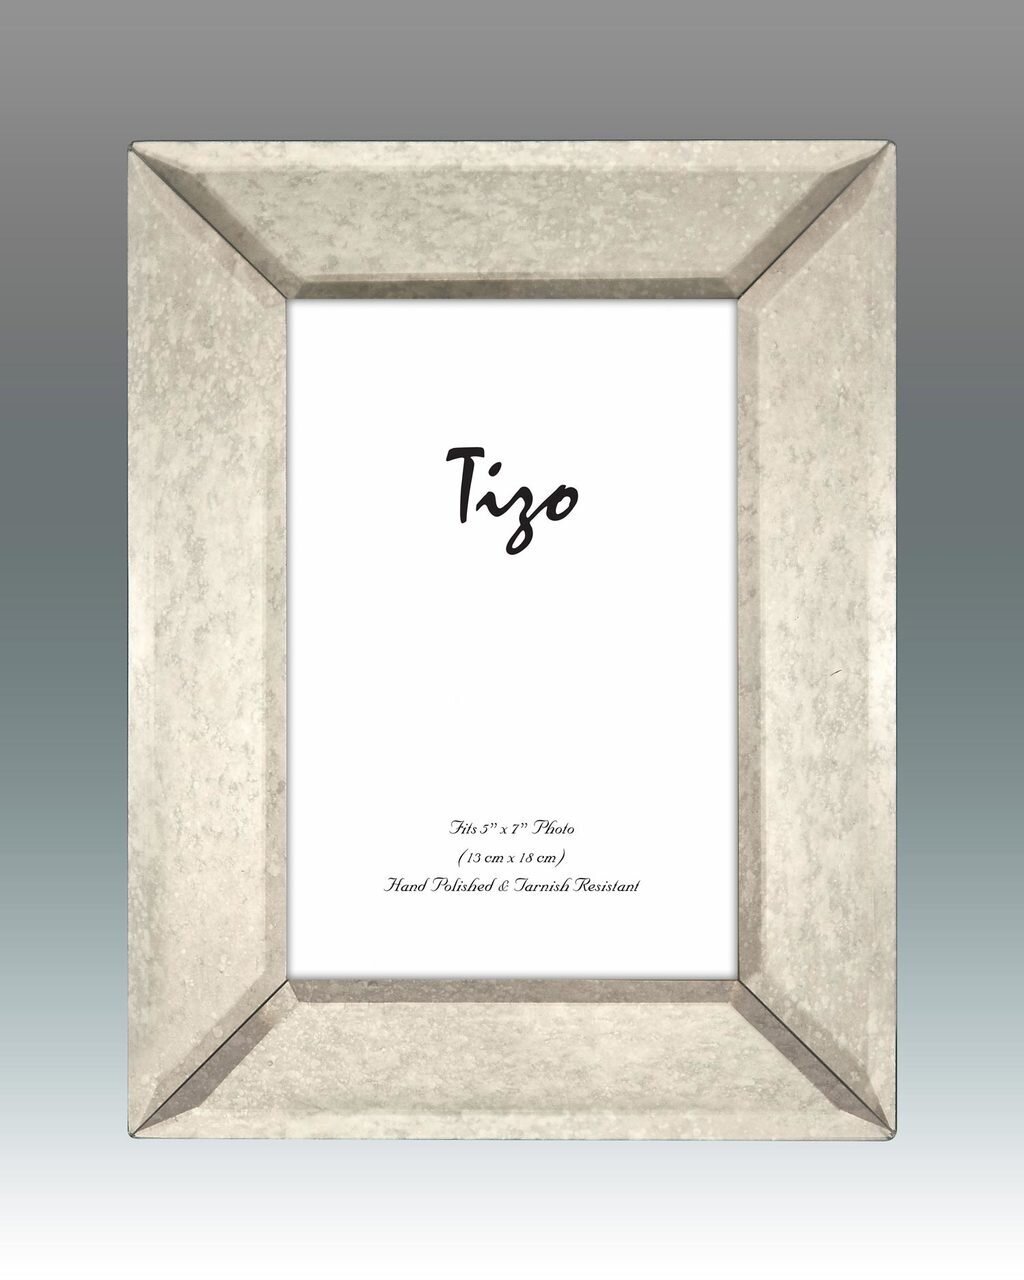 Tizo Antiqued Mirror Picture Frame 4 x 6 Inch